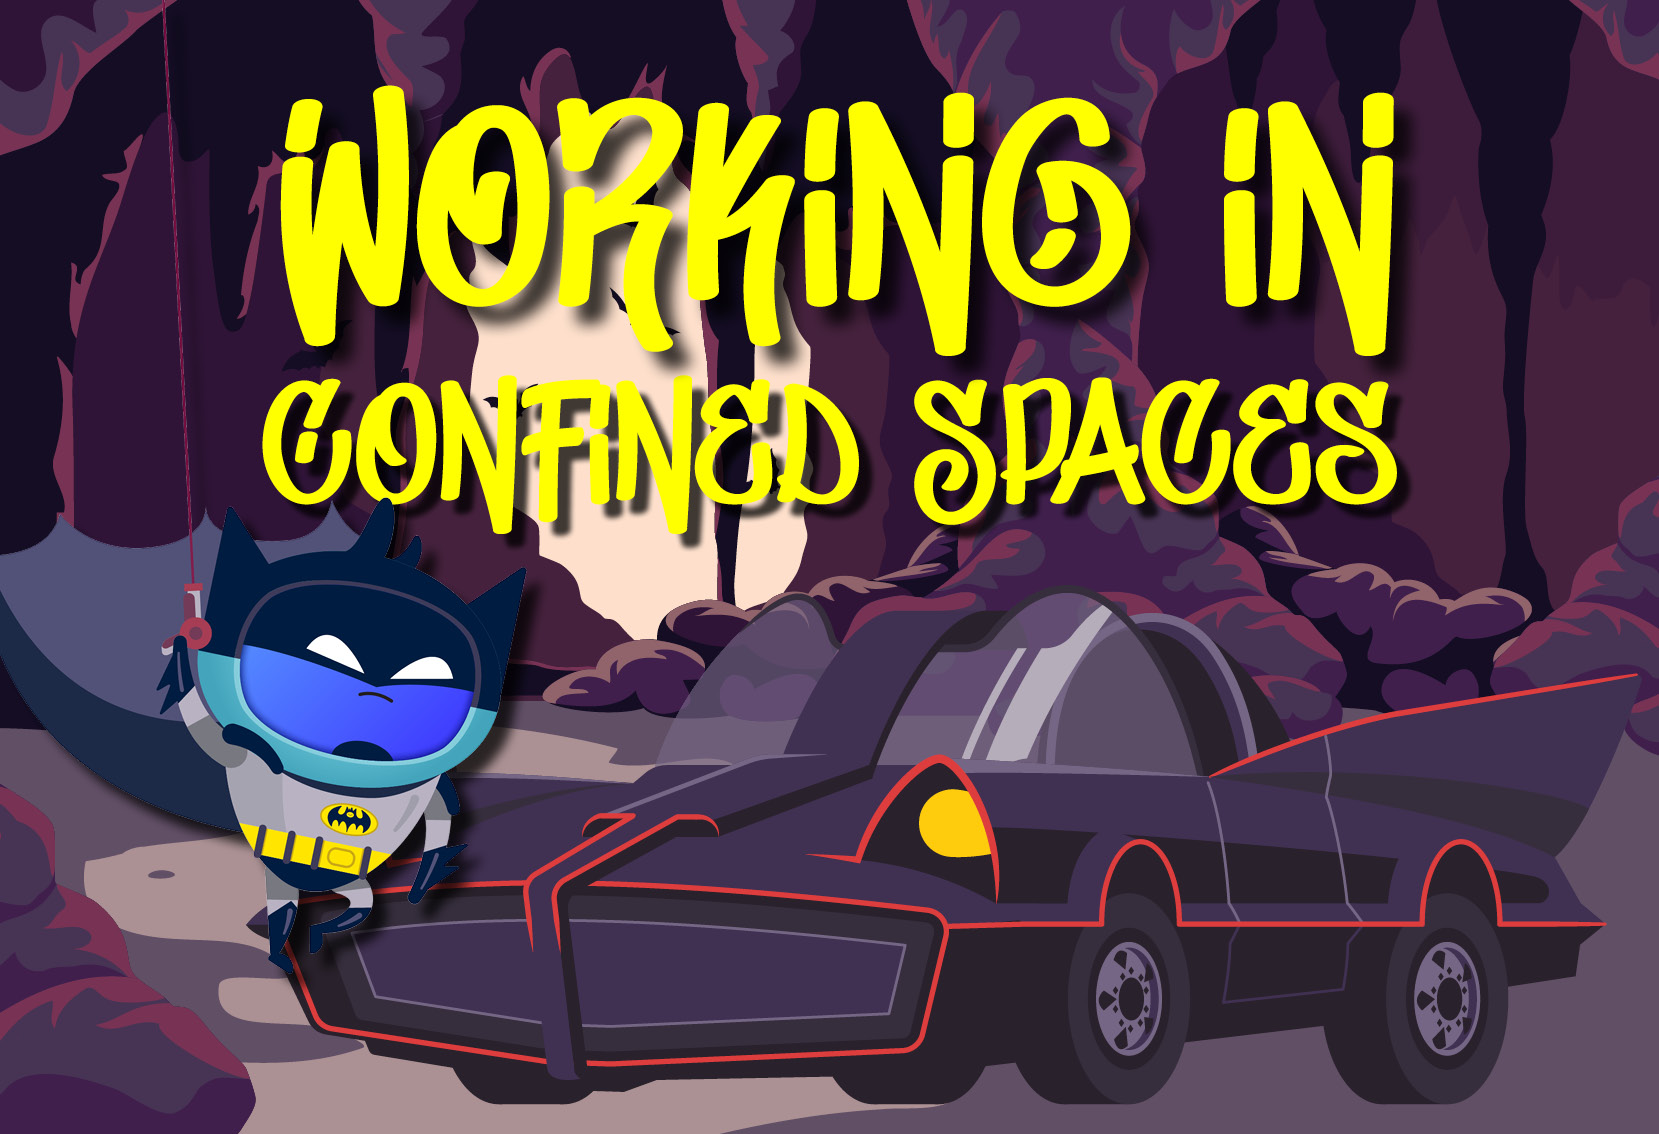 Working In Confined Spaces Thumbnail (Alternative)